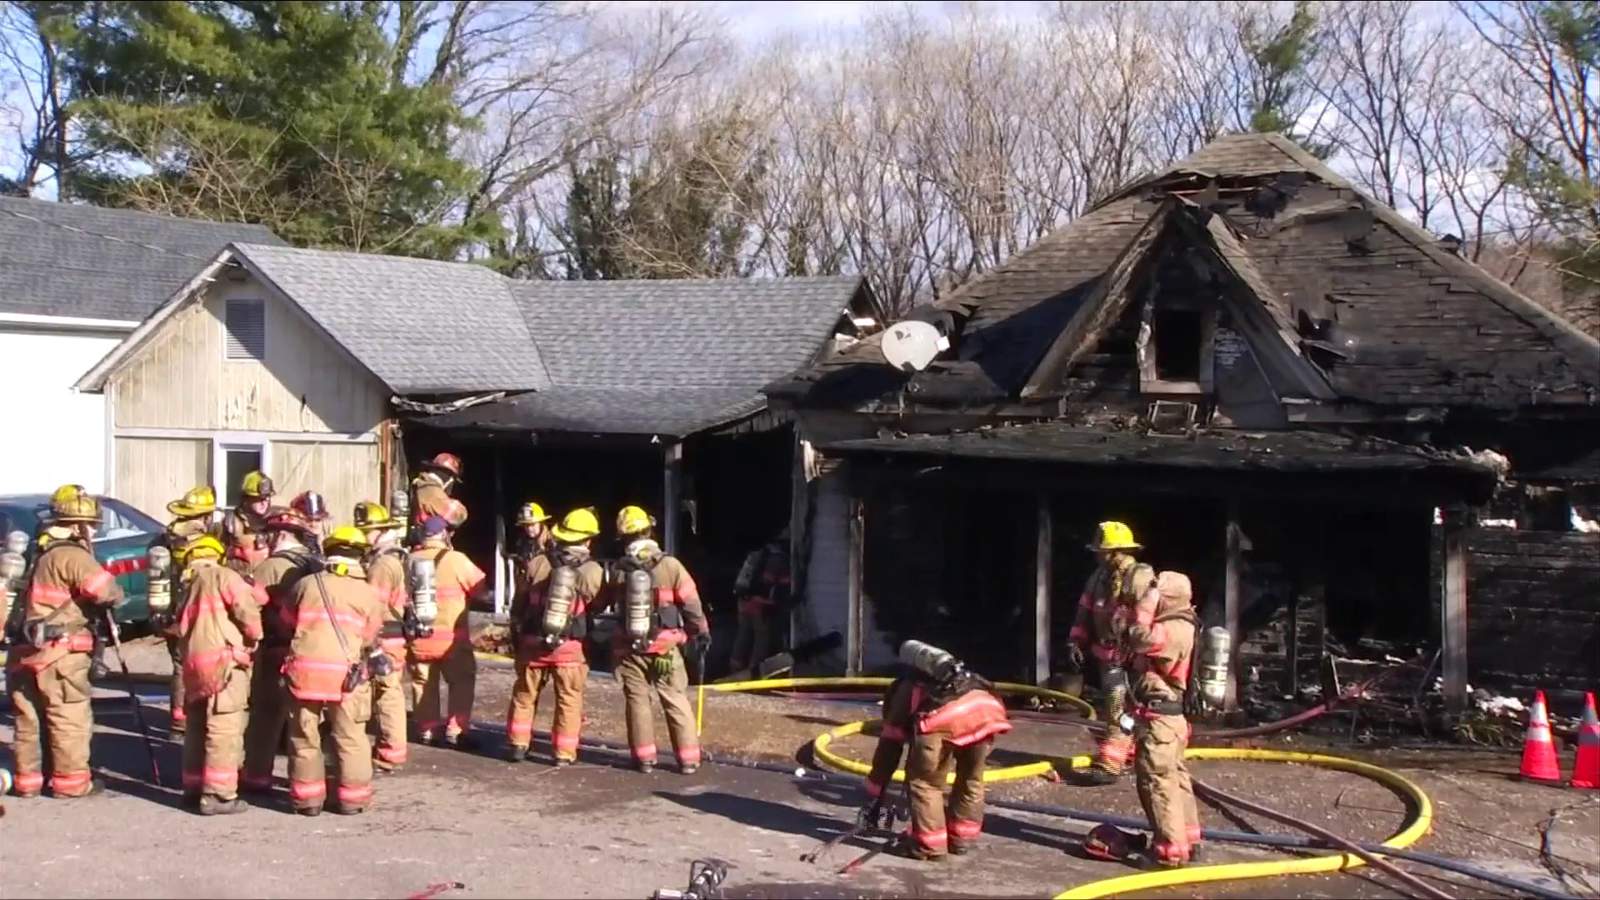 One person hurt, puppy dies after accidental Southeast Roanoke house fires